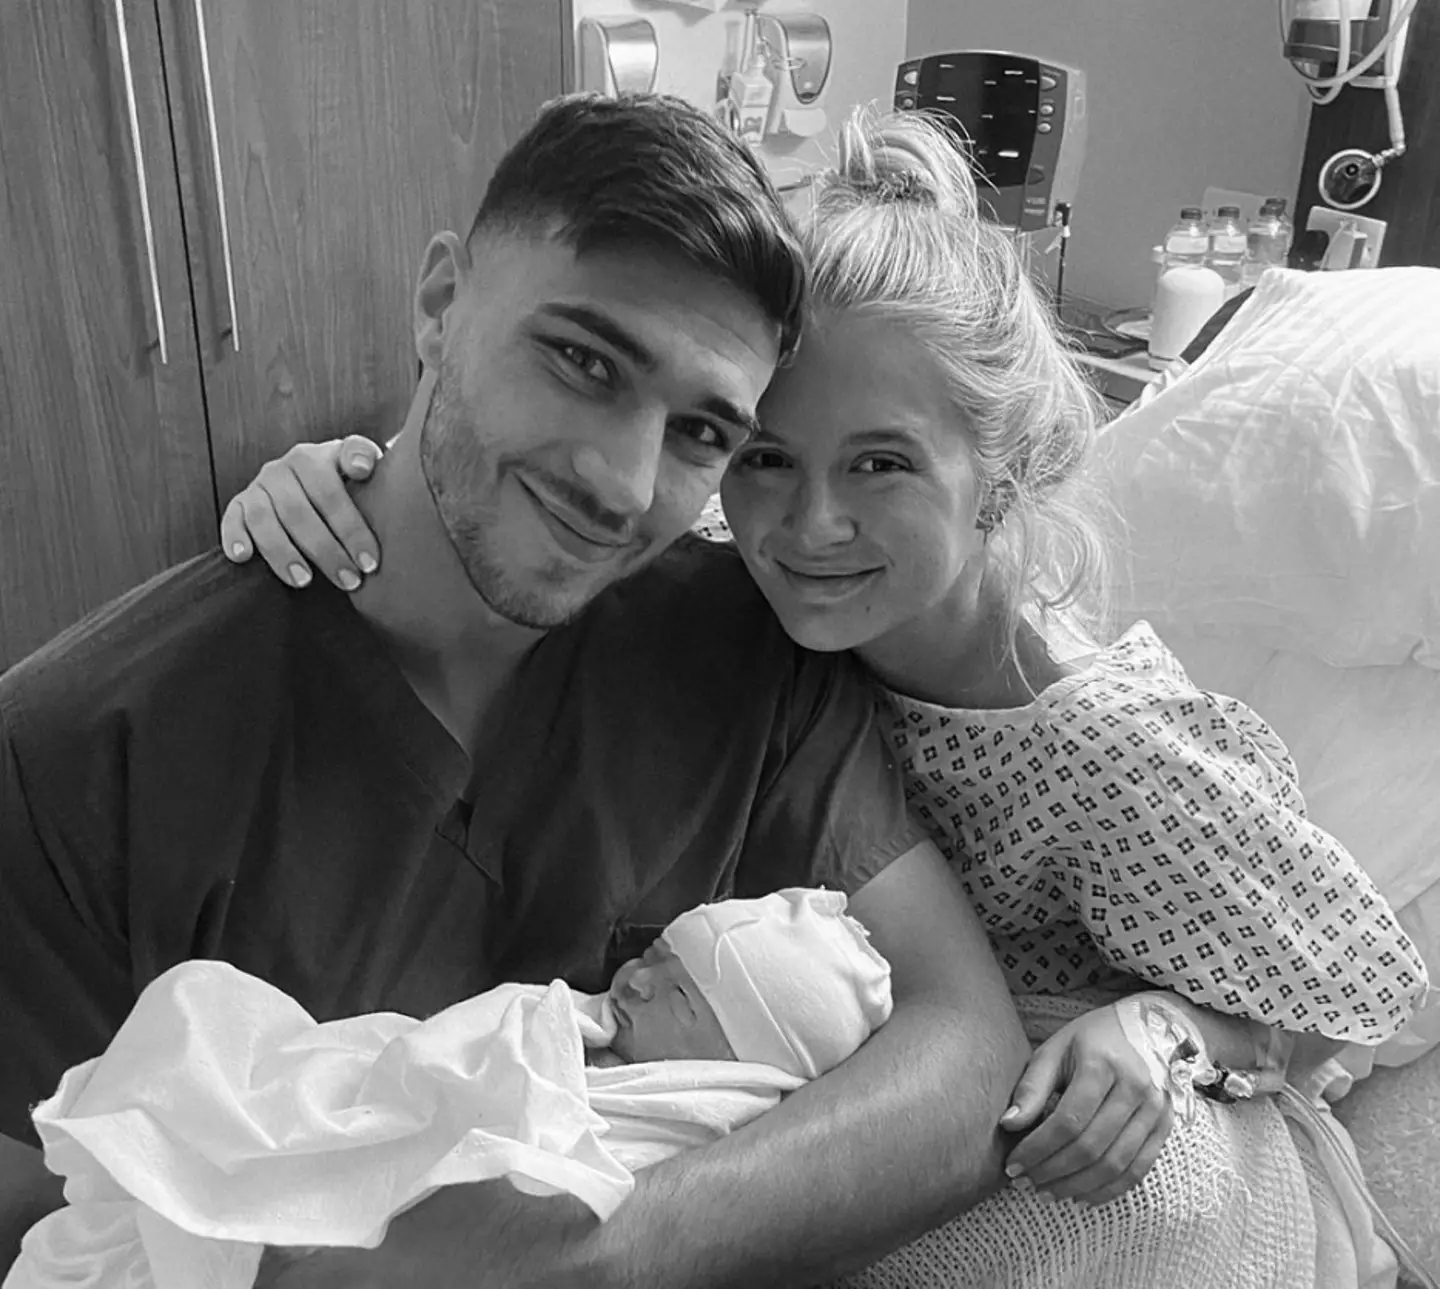 Molly-Mae and Tommy Fury welcomed baby Bambi last month.